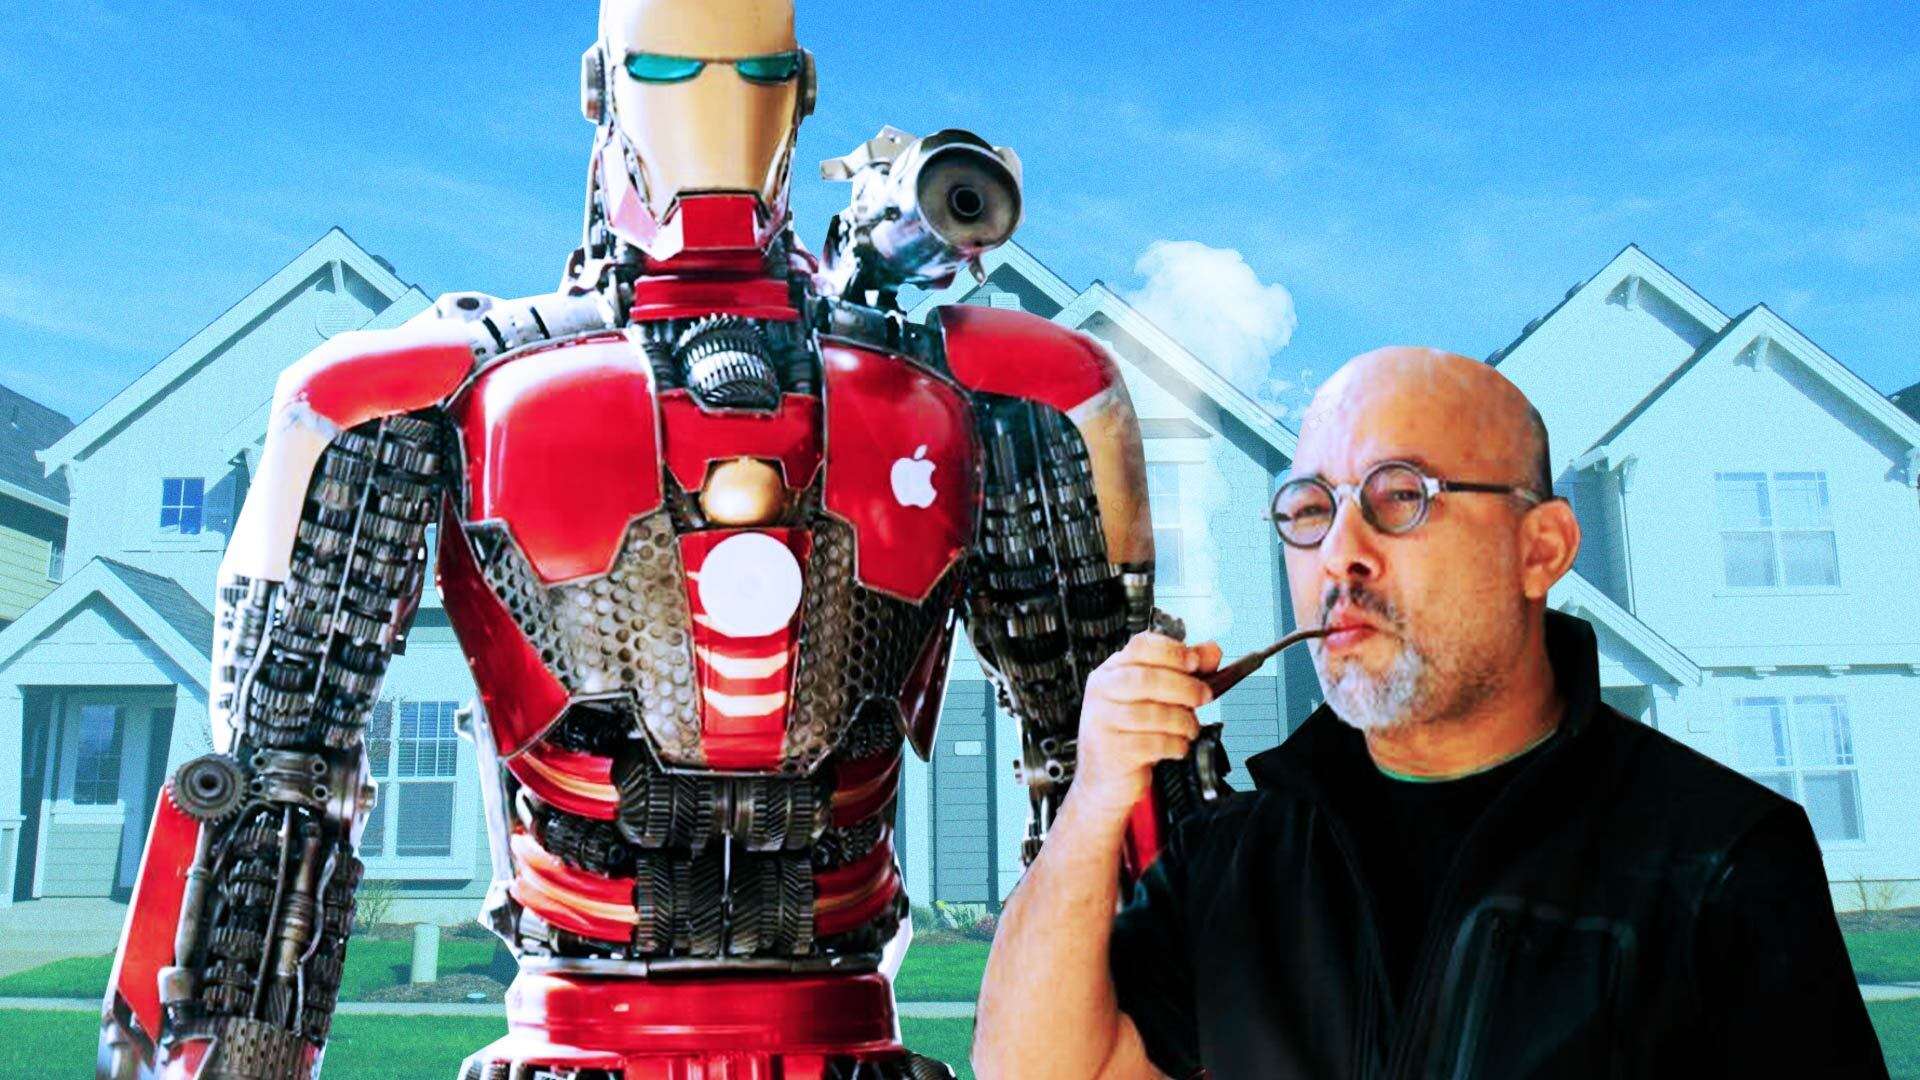 Meet Newton Howard, the Brain Scientist Who Put Giant Transformers in Front of His D.C. Home